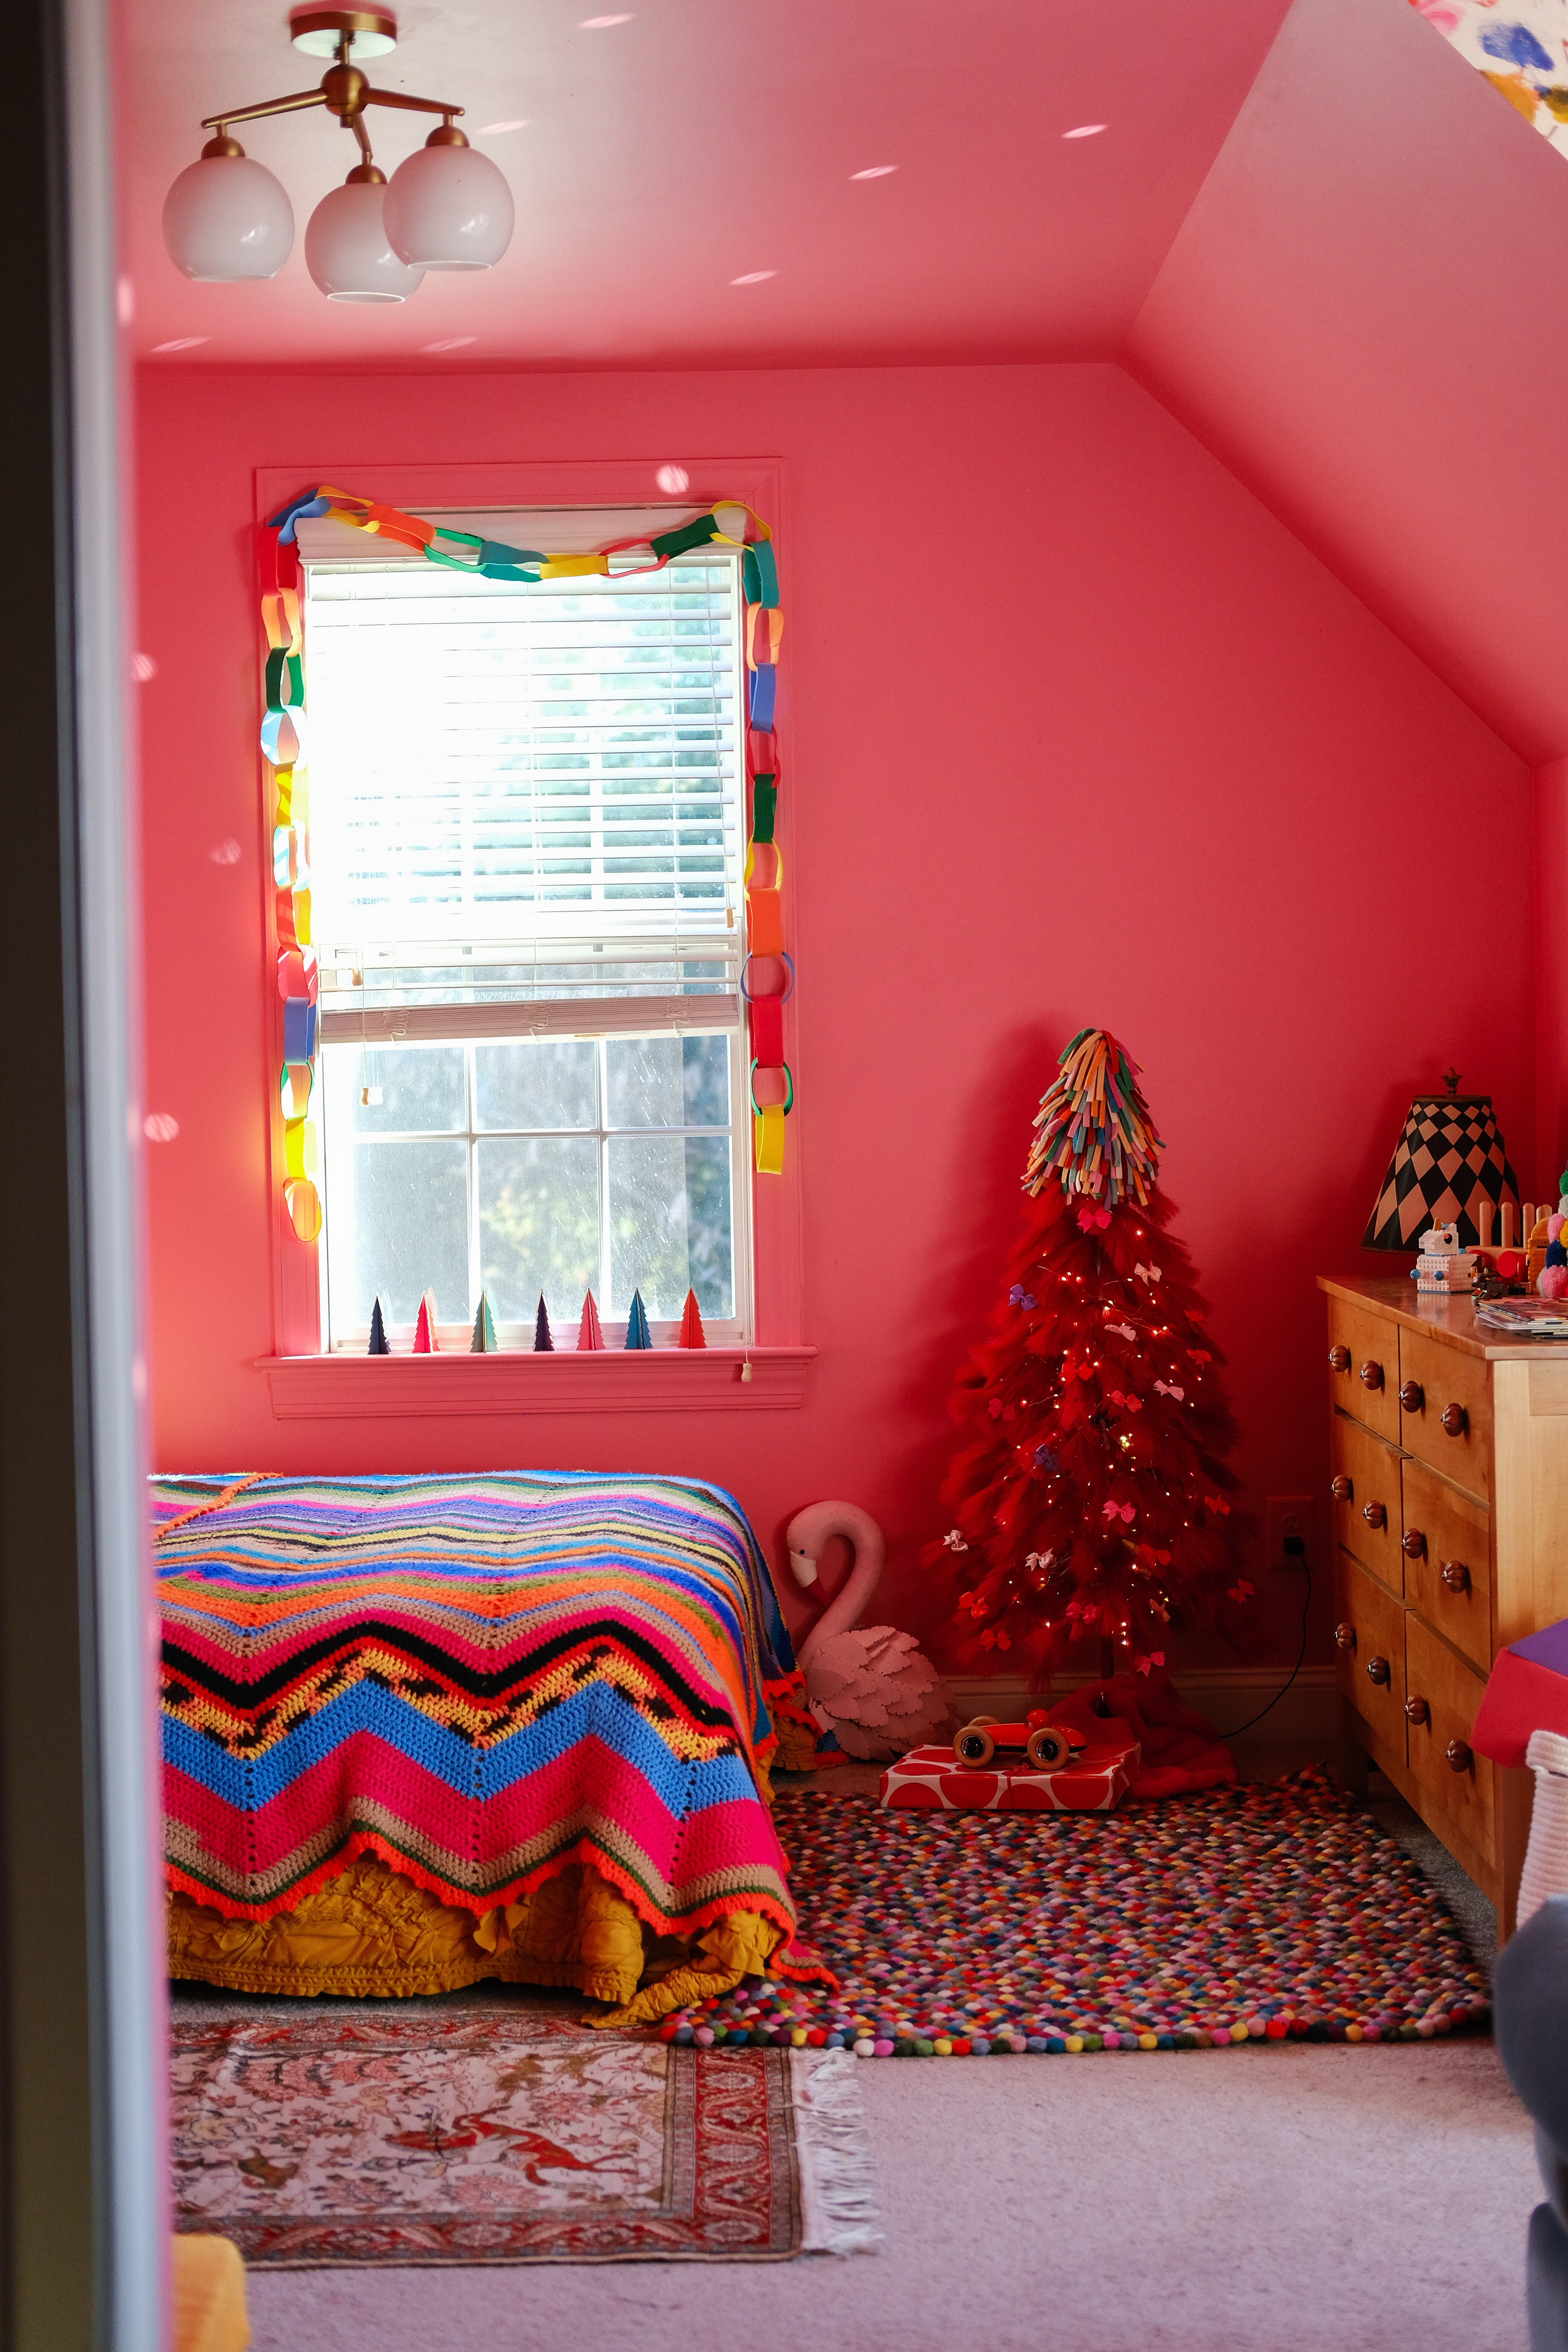 Child's room decorated wit colorful and fun Christmas decor